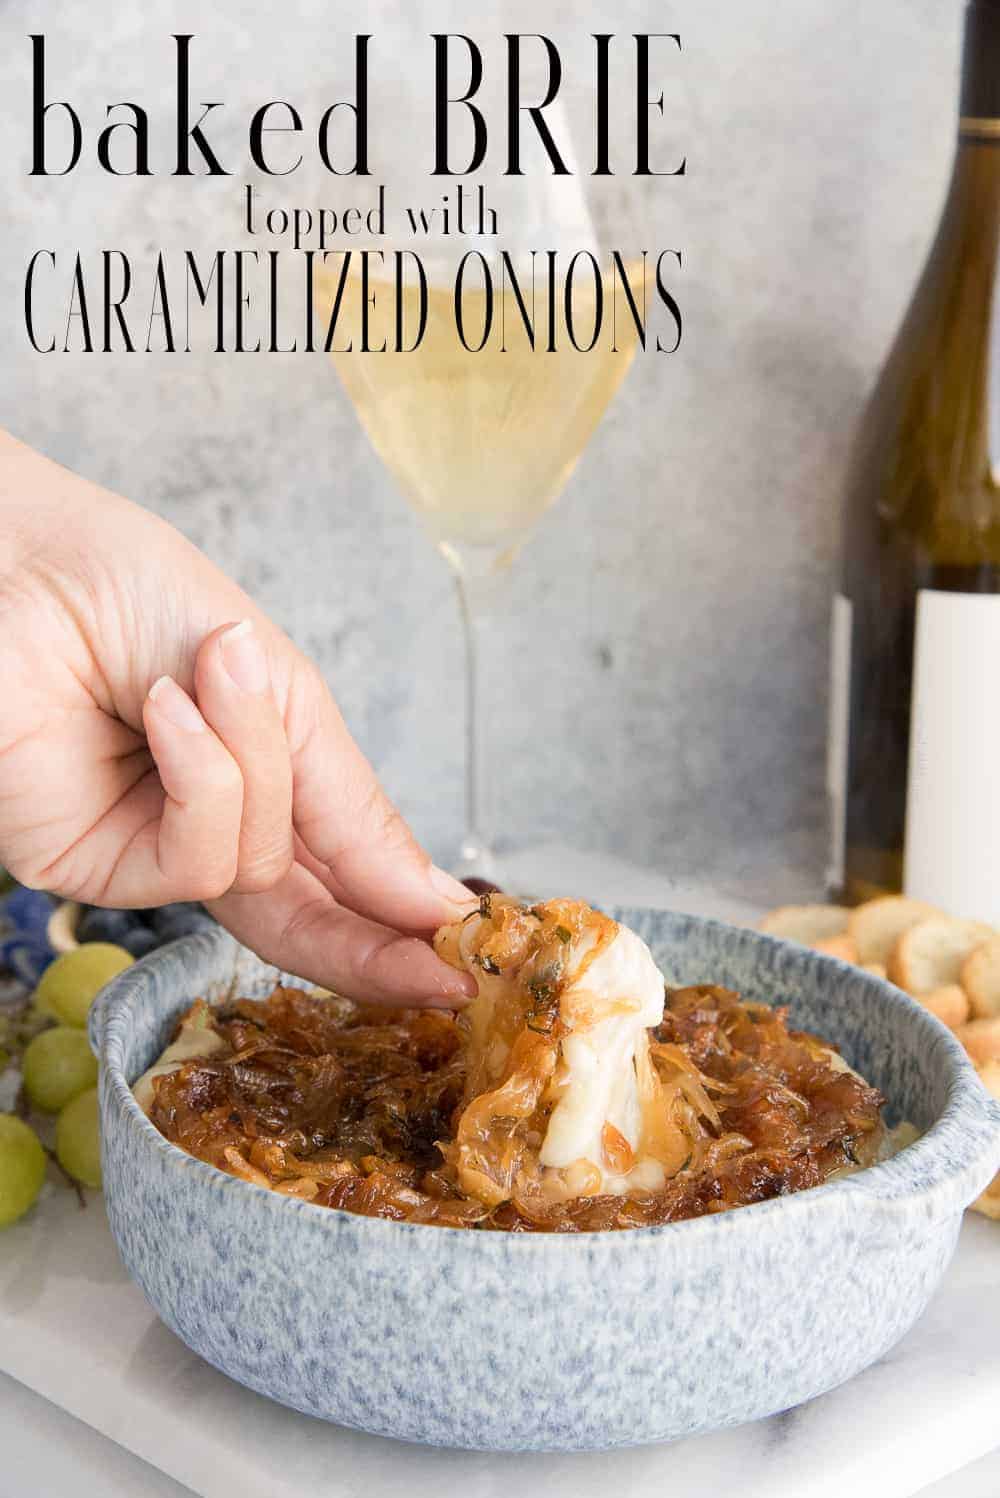 Baked Brie Topped with Caramelized Onions is an easy snack or party appetizer. Made with white wine, the caramelized onions can also be used to top your favorite burgers, pizzas, or poultry. #brie #cheese #meatandcheeseboard #cheeseboard #caramelizedonions #appetizer #starters #parties #cocktailparty #holiday #brierecipe #bakedbrie via @ediblesense